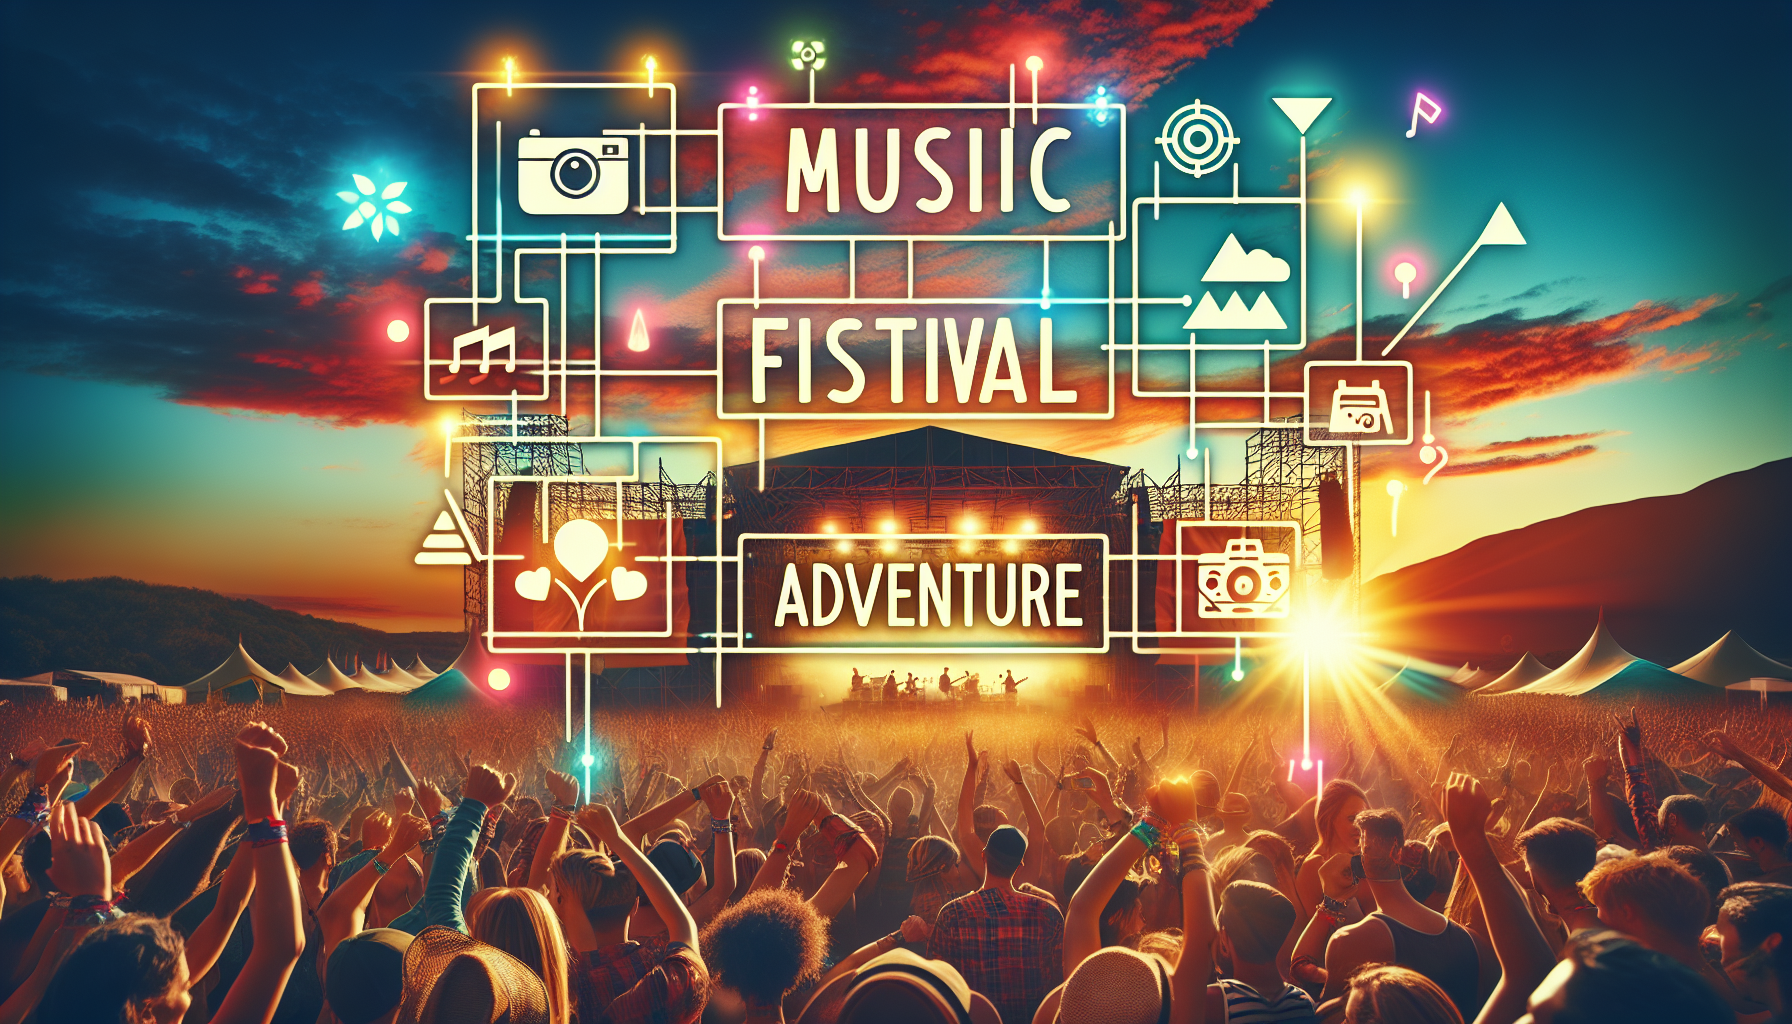 get ready for the ultimate music festival adventure with our guide to preparation and tips. find out everything you need to know to make the most of the experience!